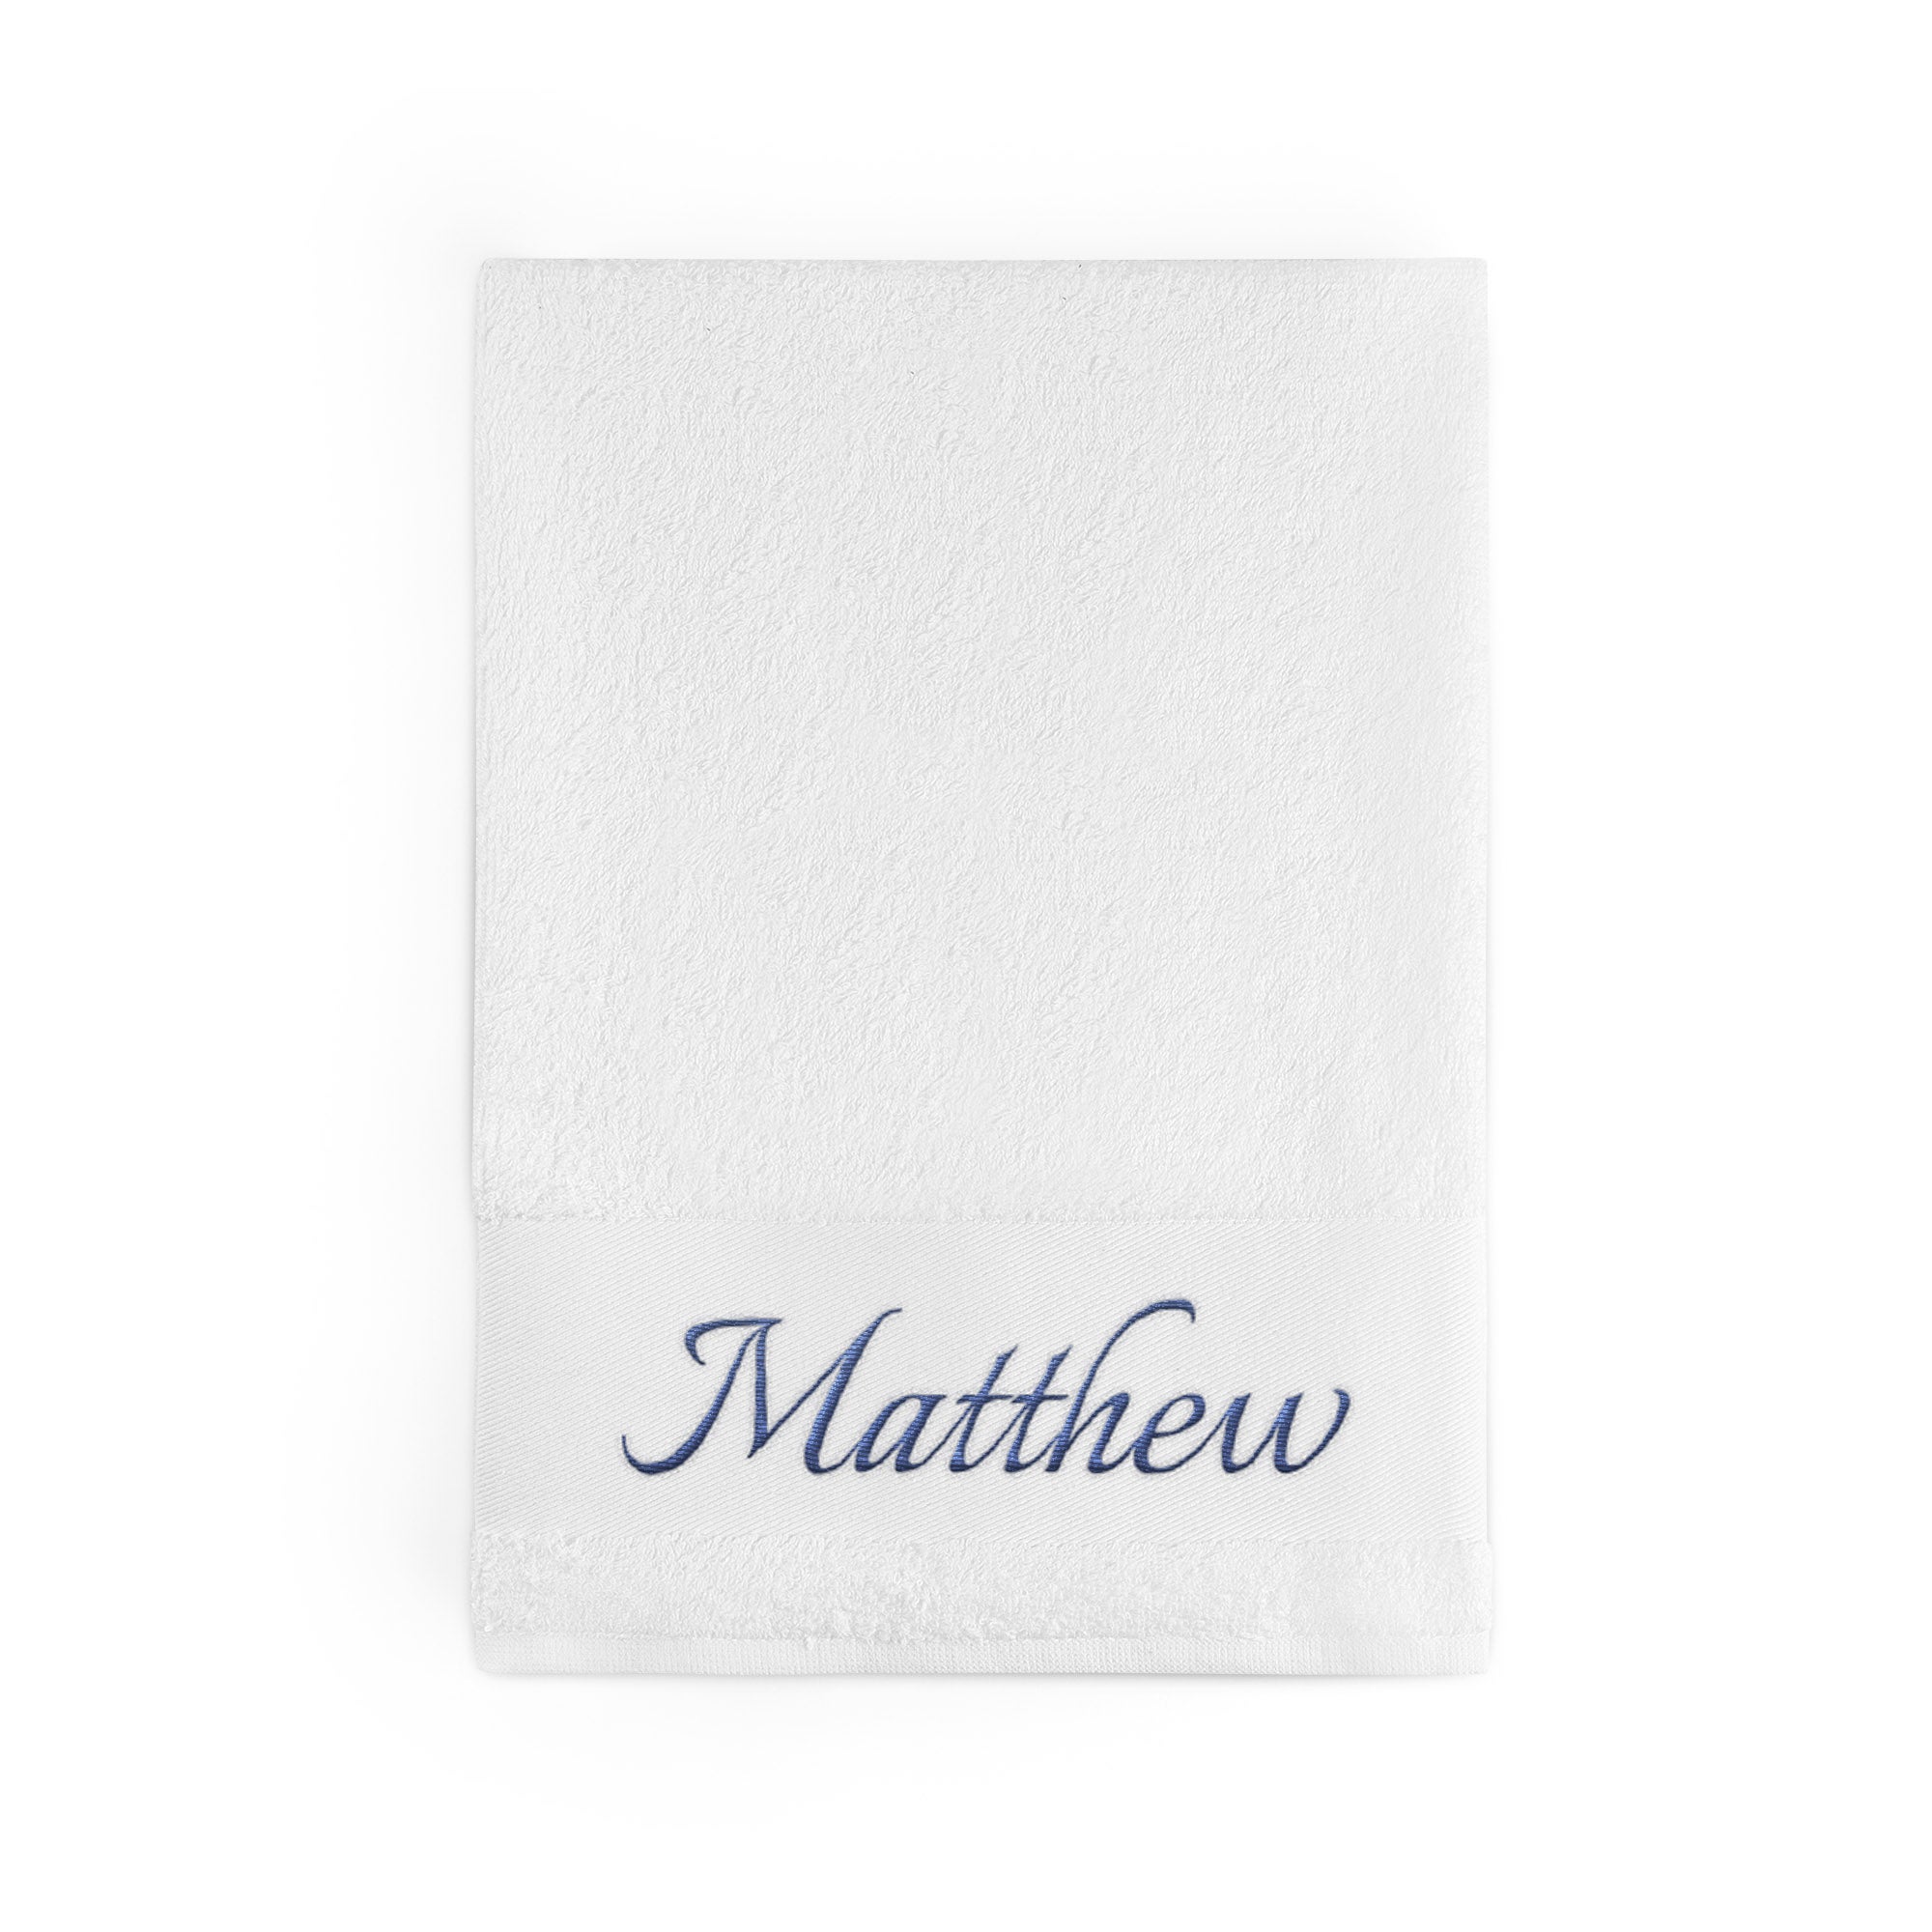 Name Hearts Personalised Embroidered towels Valentine Gift Birthday Wedding 